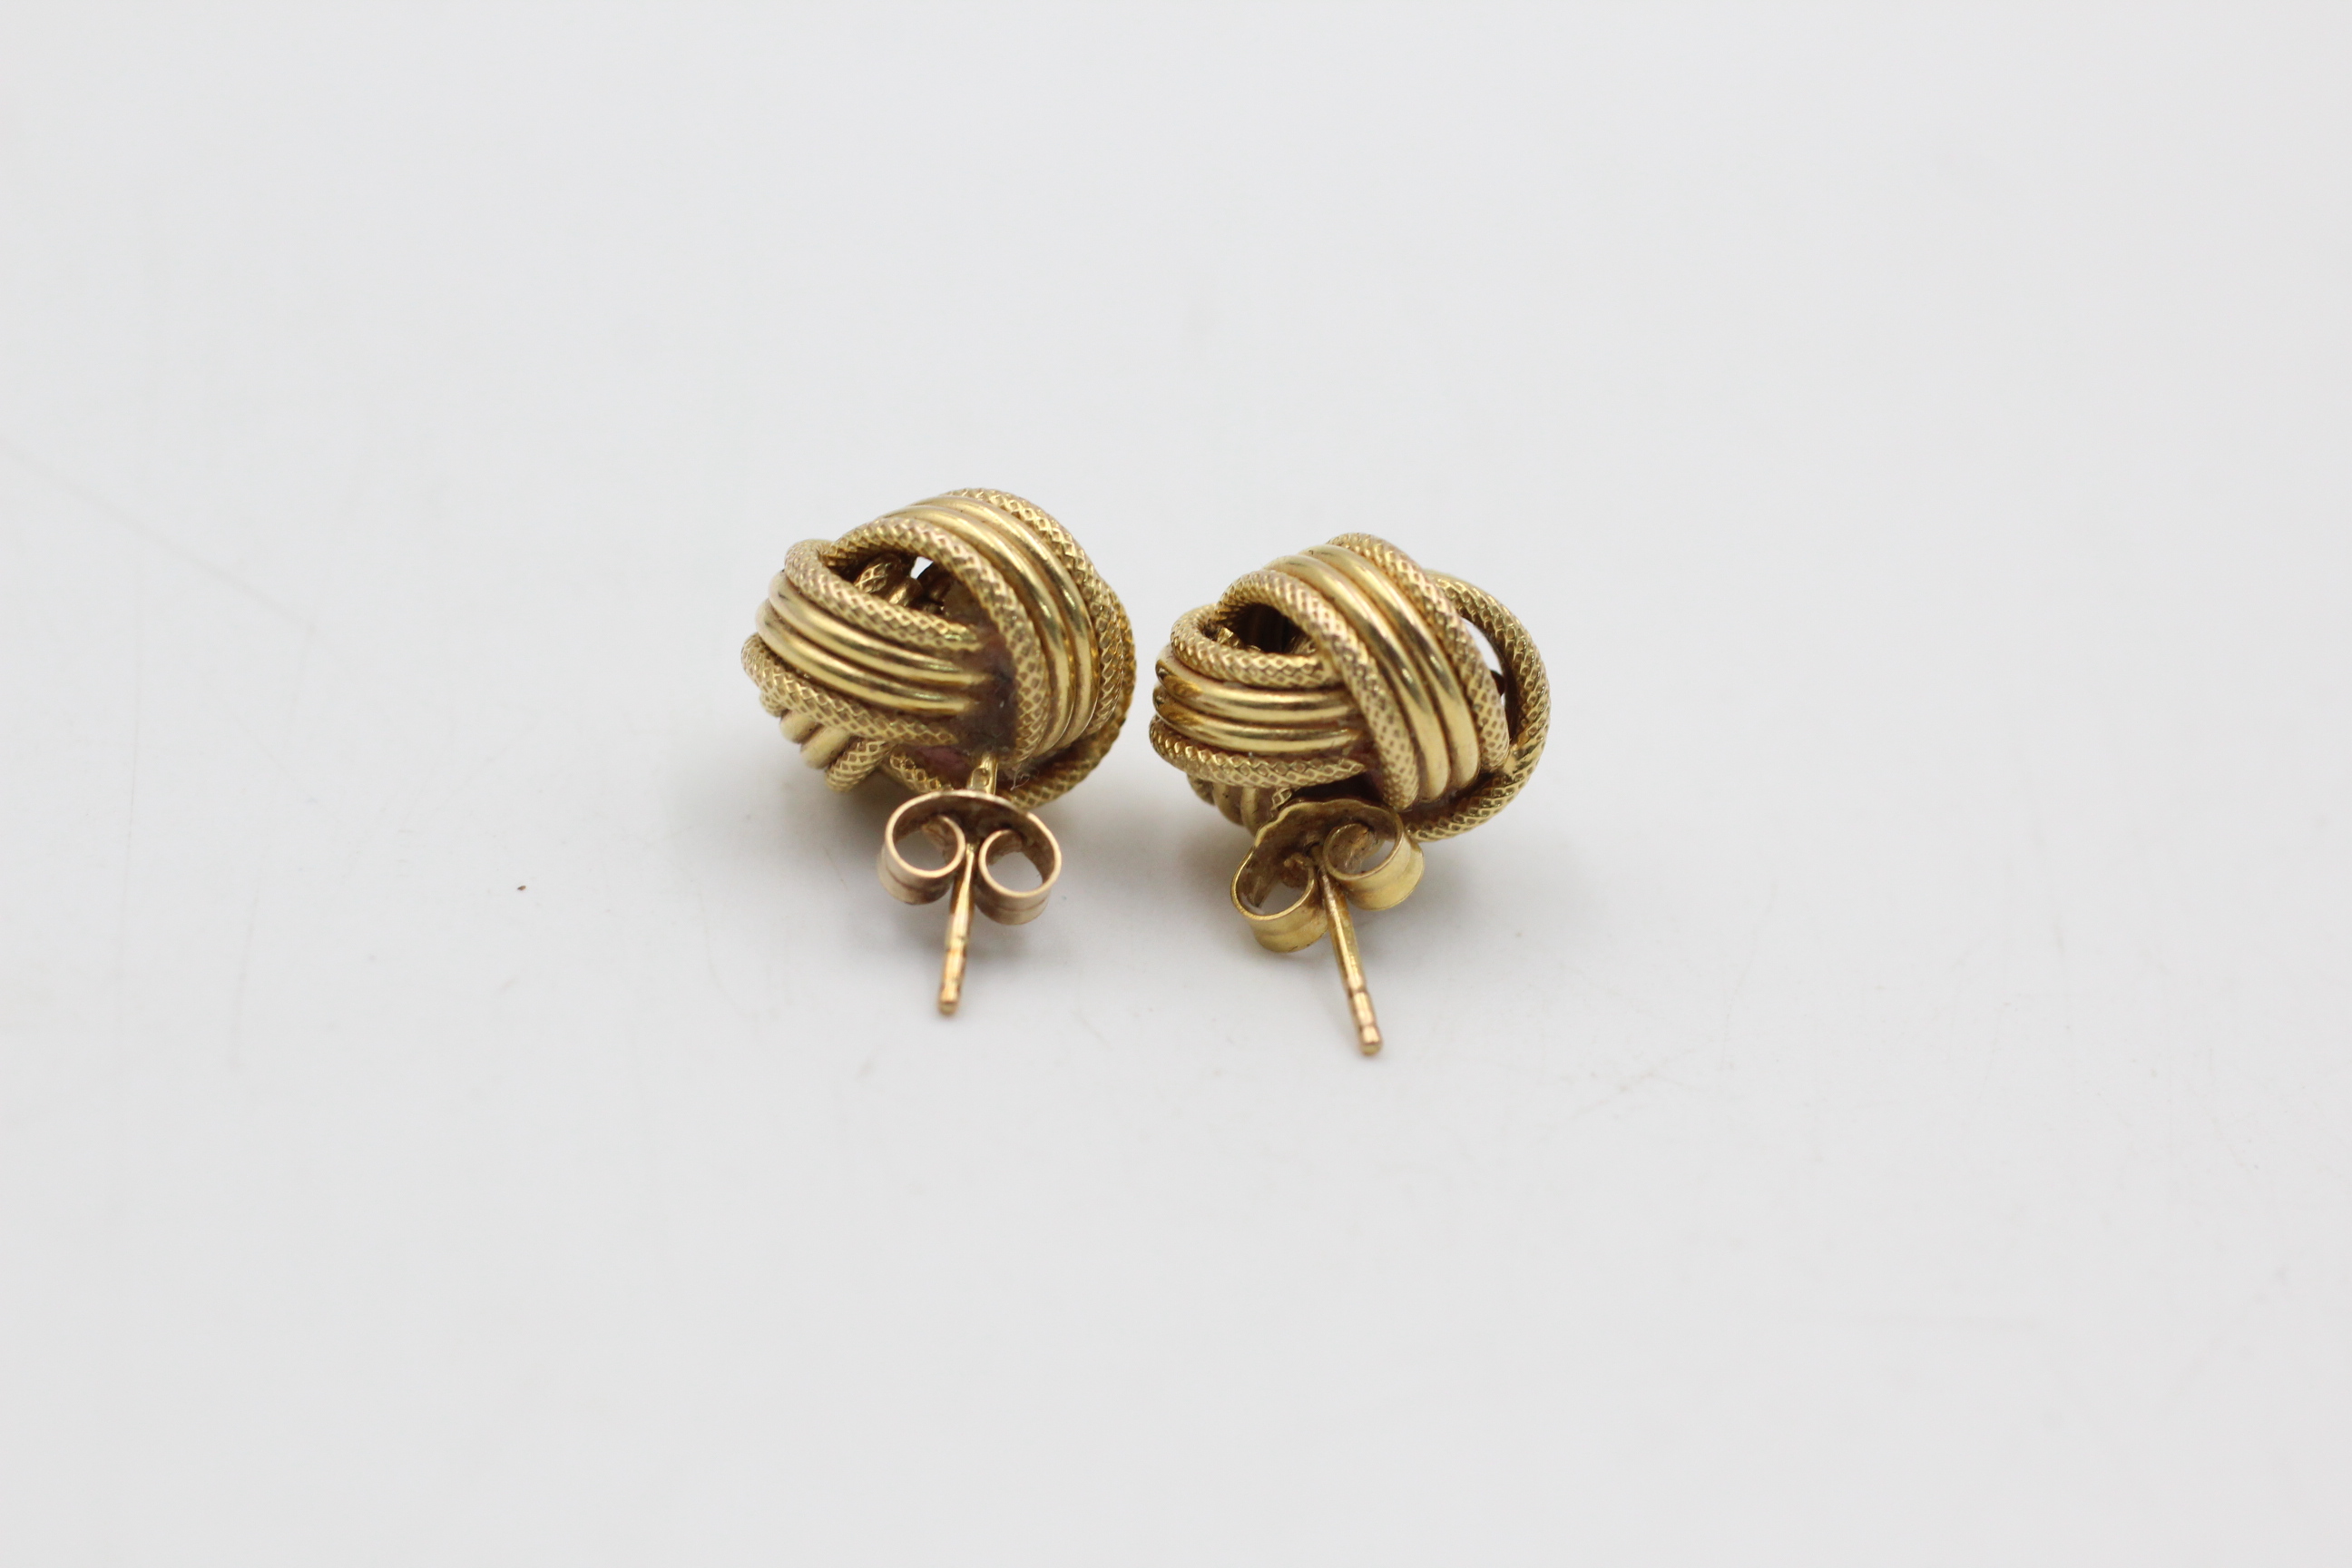 9ct gold textured knot stud earrings (3.3g) - Image 3 of 4